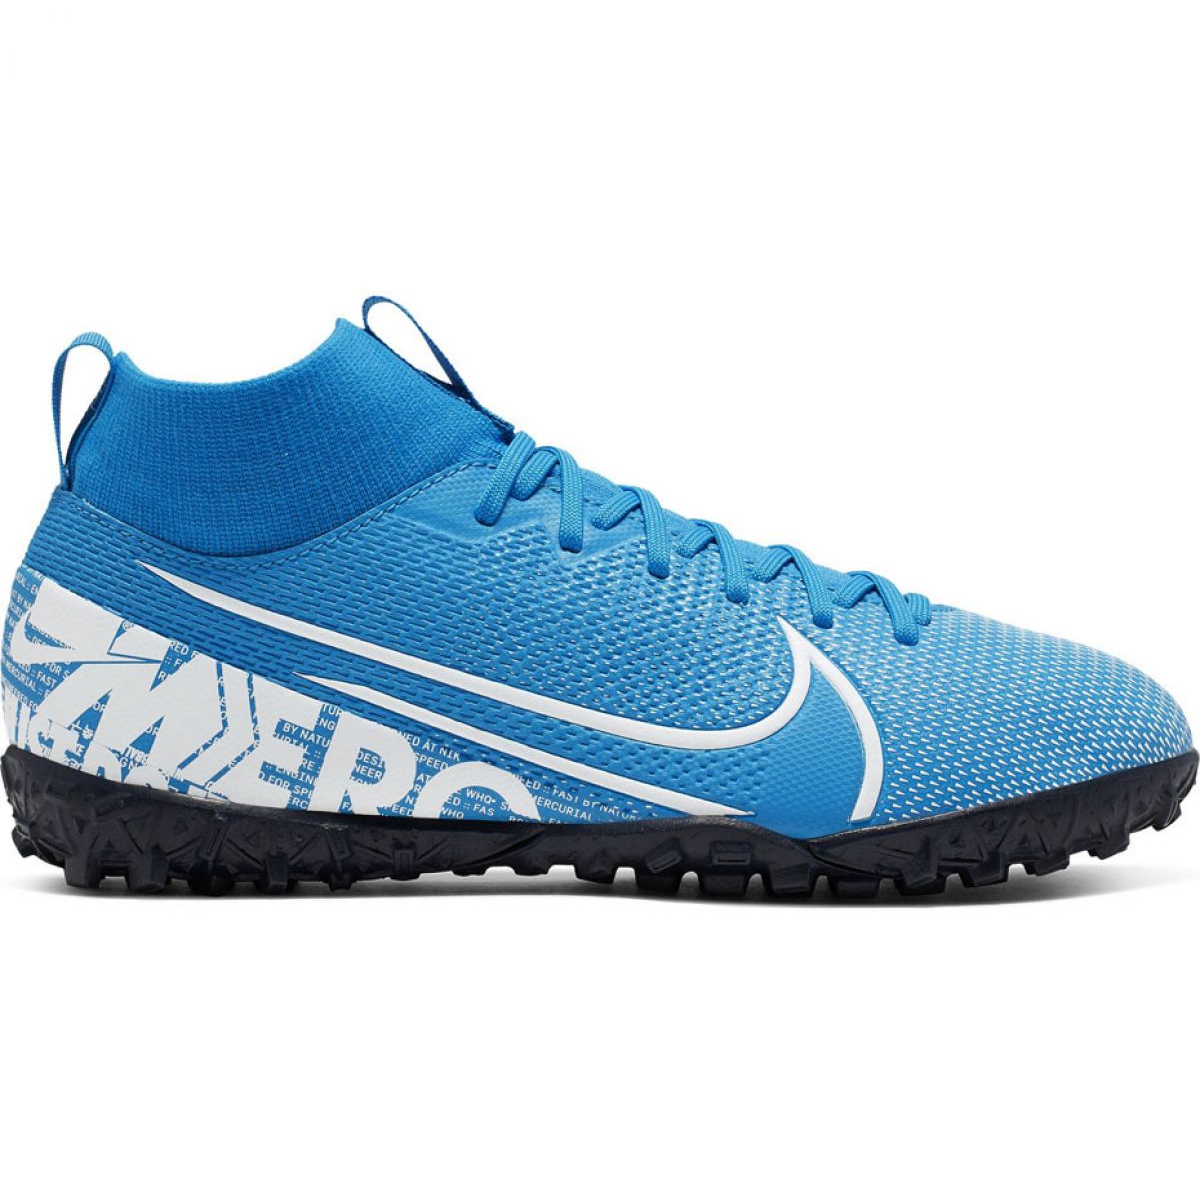 Nike Mercurial Superfly 7 Academy Tf Jr AT8143 414 football shoes blue ...